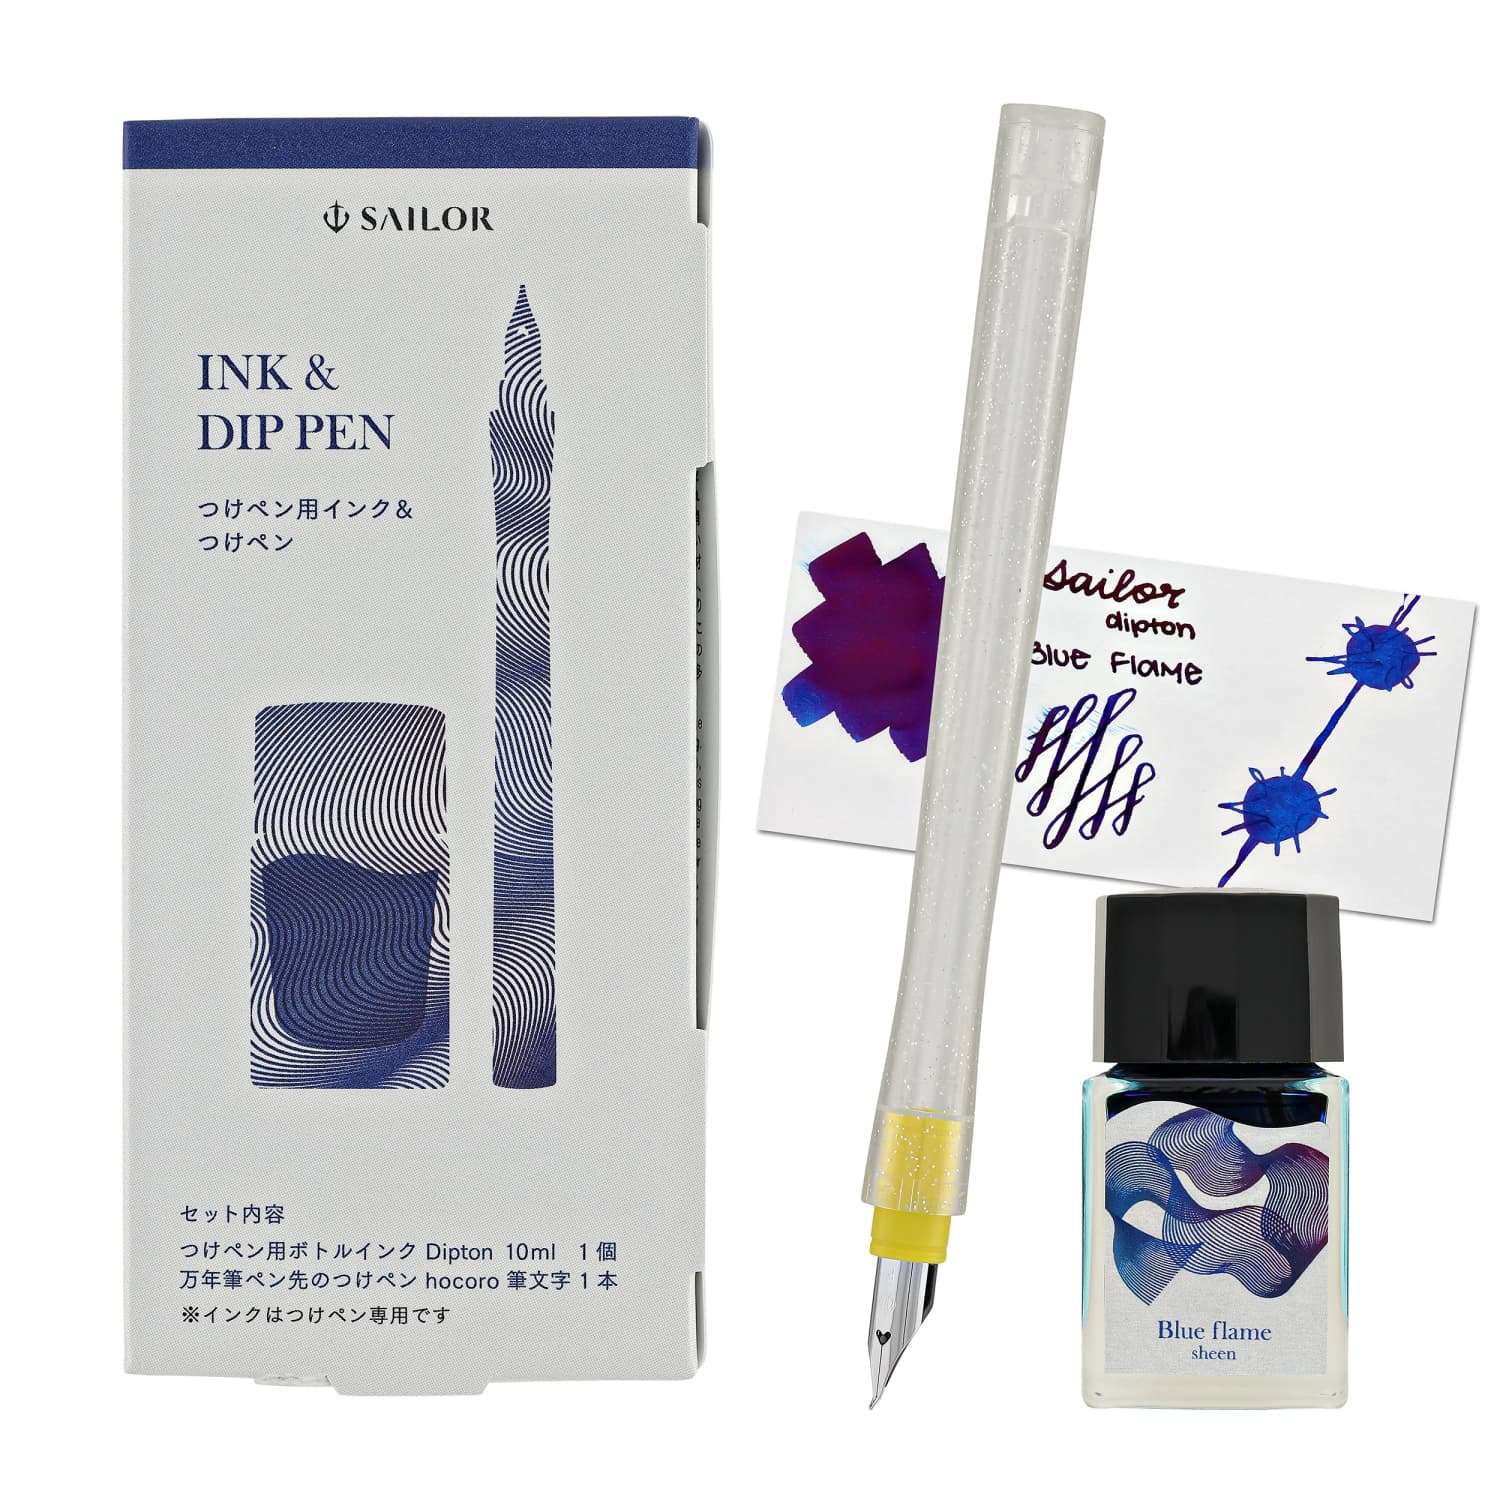 Sailor Compass Dipton Sheen Bottled Ink in Blue Flame with Dip with Pen Set  - 10mL